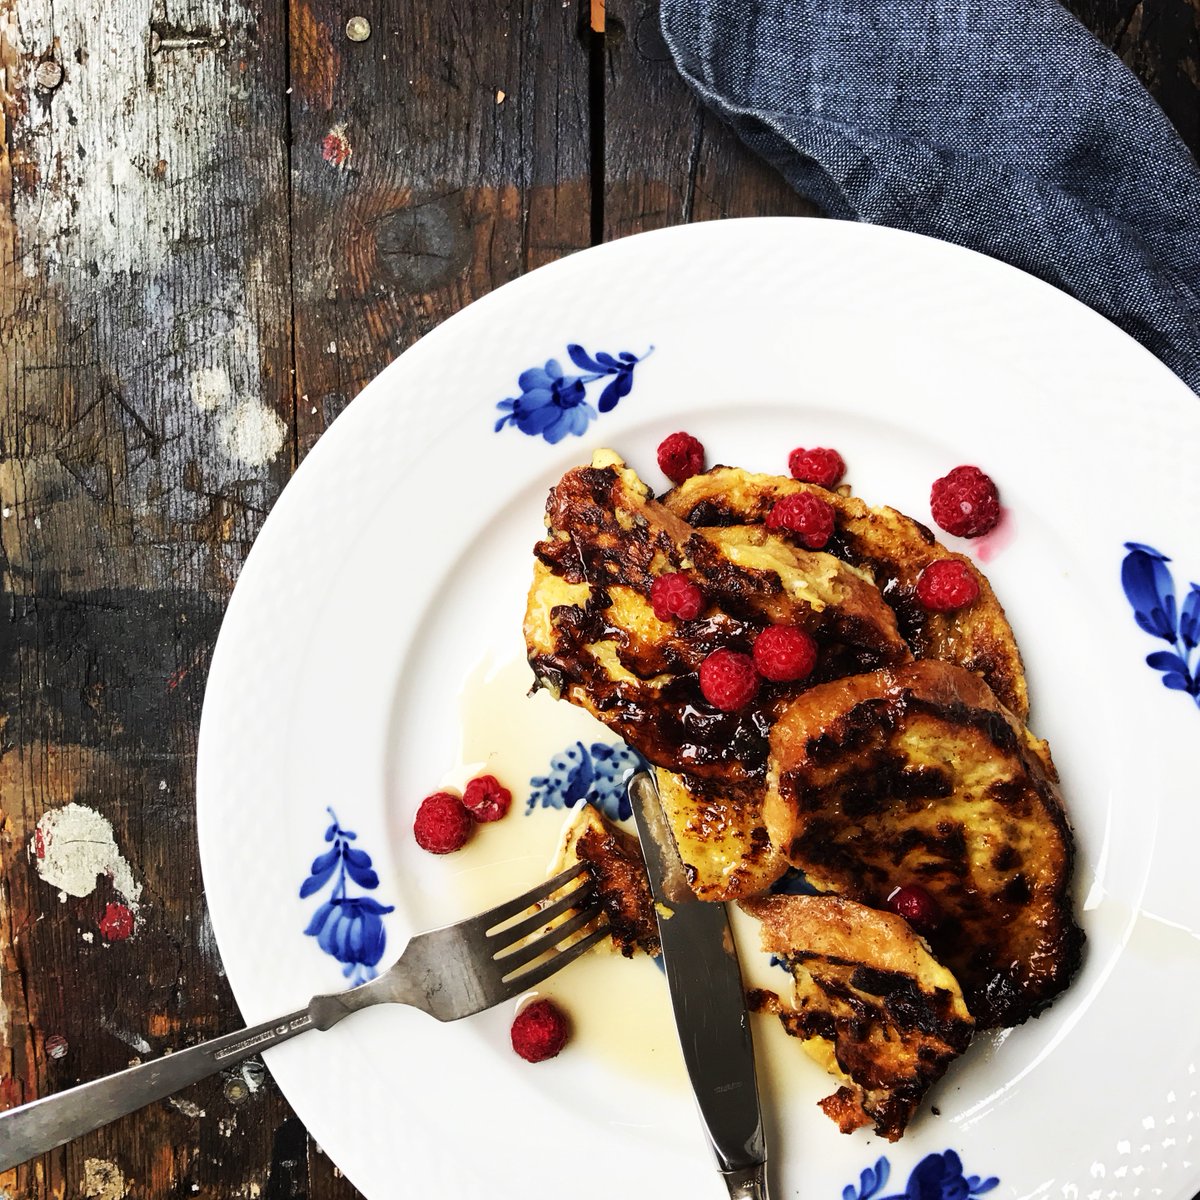 French Toast with Raspberries & Maple Syrup

Wake up with something special!

Get our free recipe app. Link in profile.

#FrenchToast #BreakfastGourmet #RiseAndShine #DeliciousTreats #Breakfast #GourmetBreakfast #BreakfastIdeas #FrenchToastForBreakfast #BreakfastForDinner